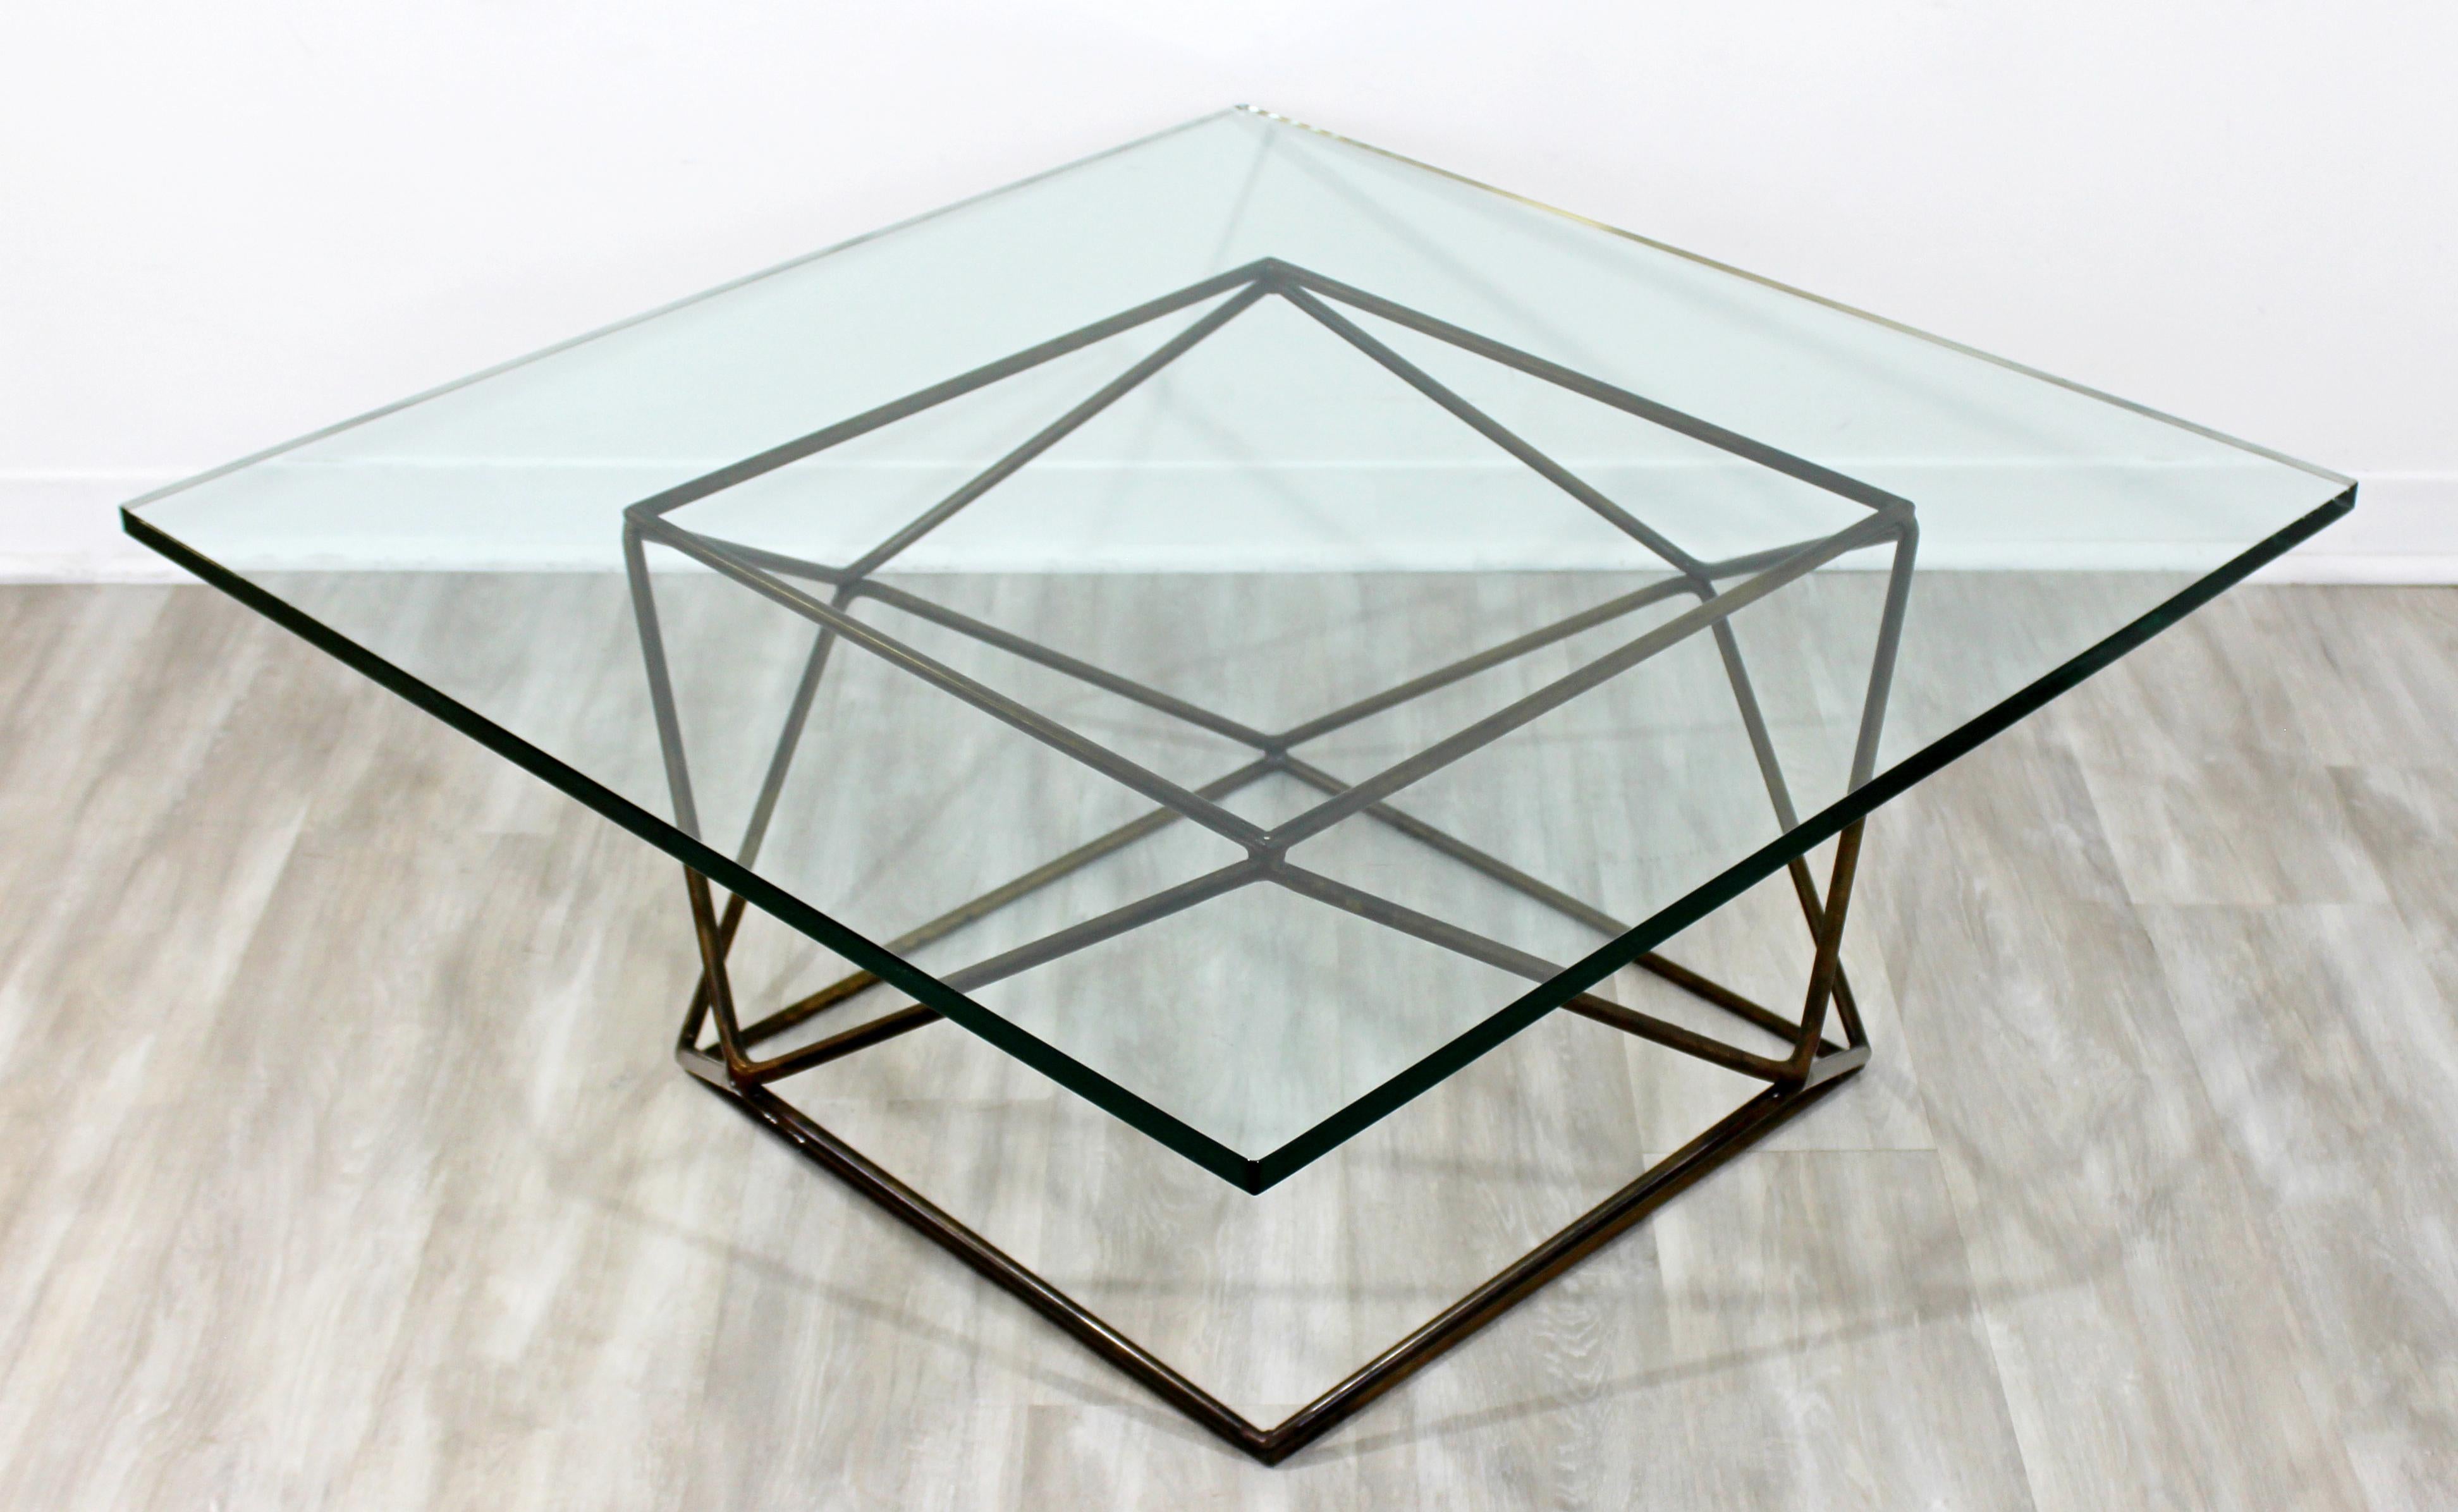 For your consideration is a geodesic, square glass top coffee table, made of bronzed steel, by Milo Baughman, circa 1970s. In excellent condition. The dimensions are 38